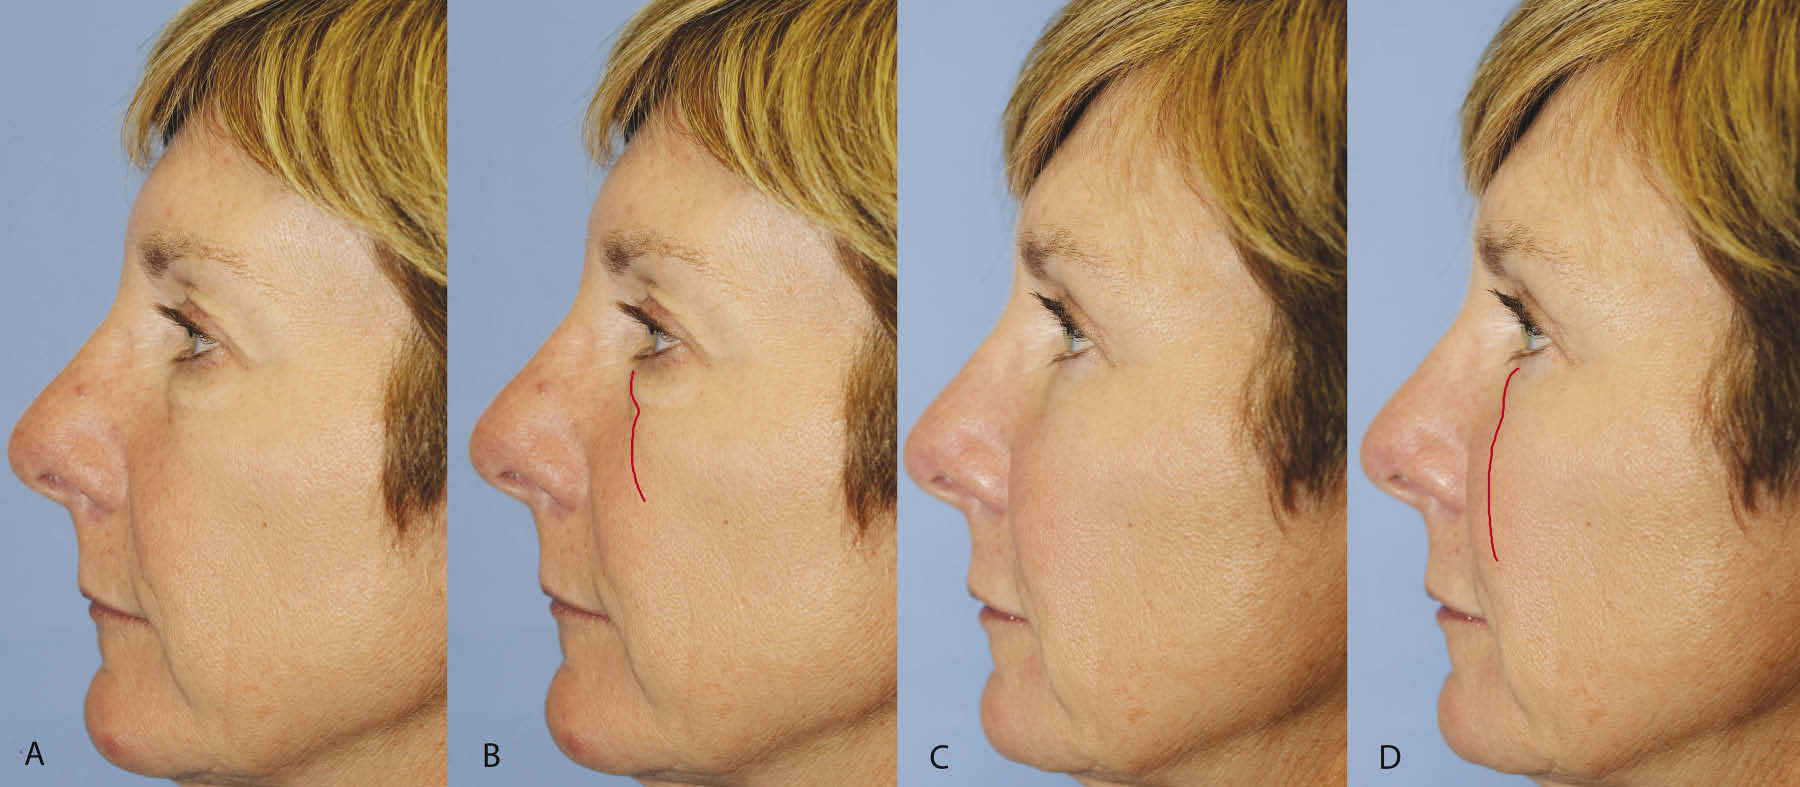 Upper and lower blepharoplasty with fat repositioning and augmentation